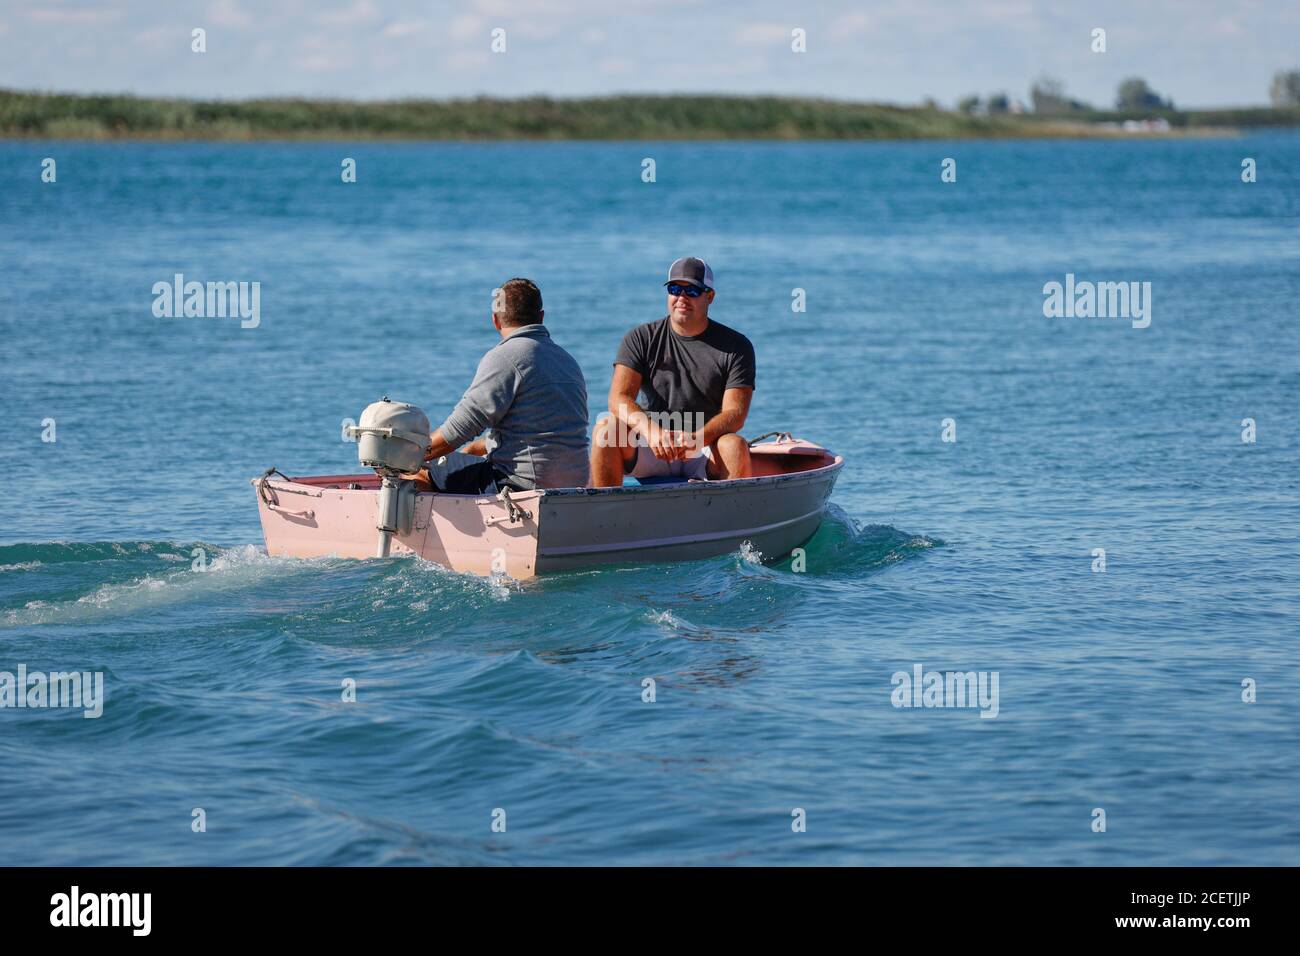 Two men in a small outboard-powered boat on a lake Stock Photo - Alamy